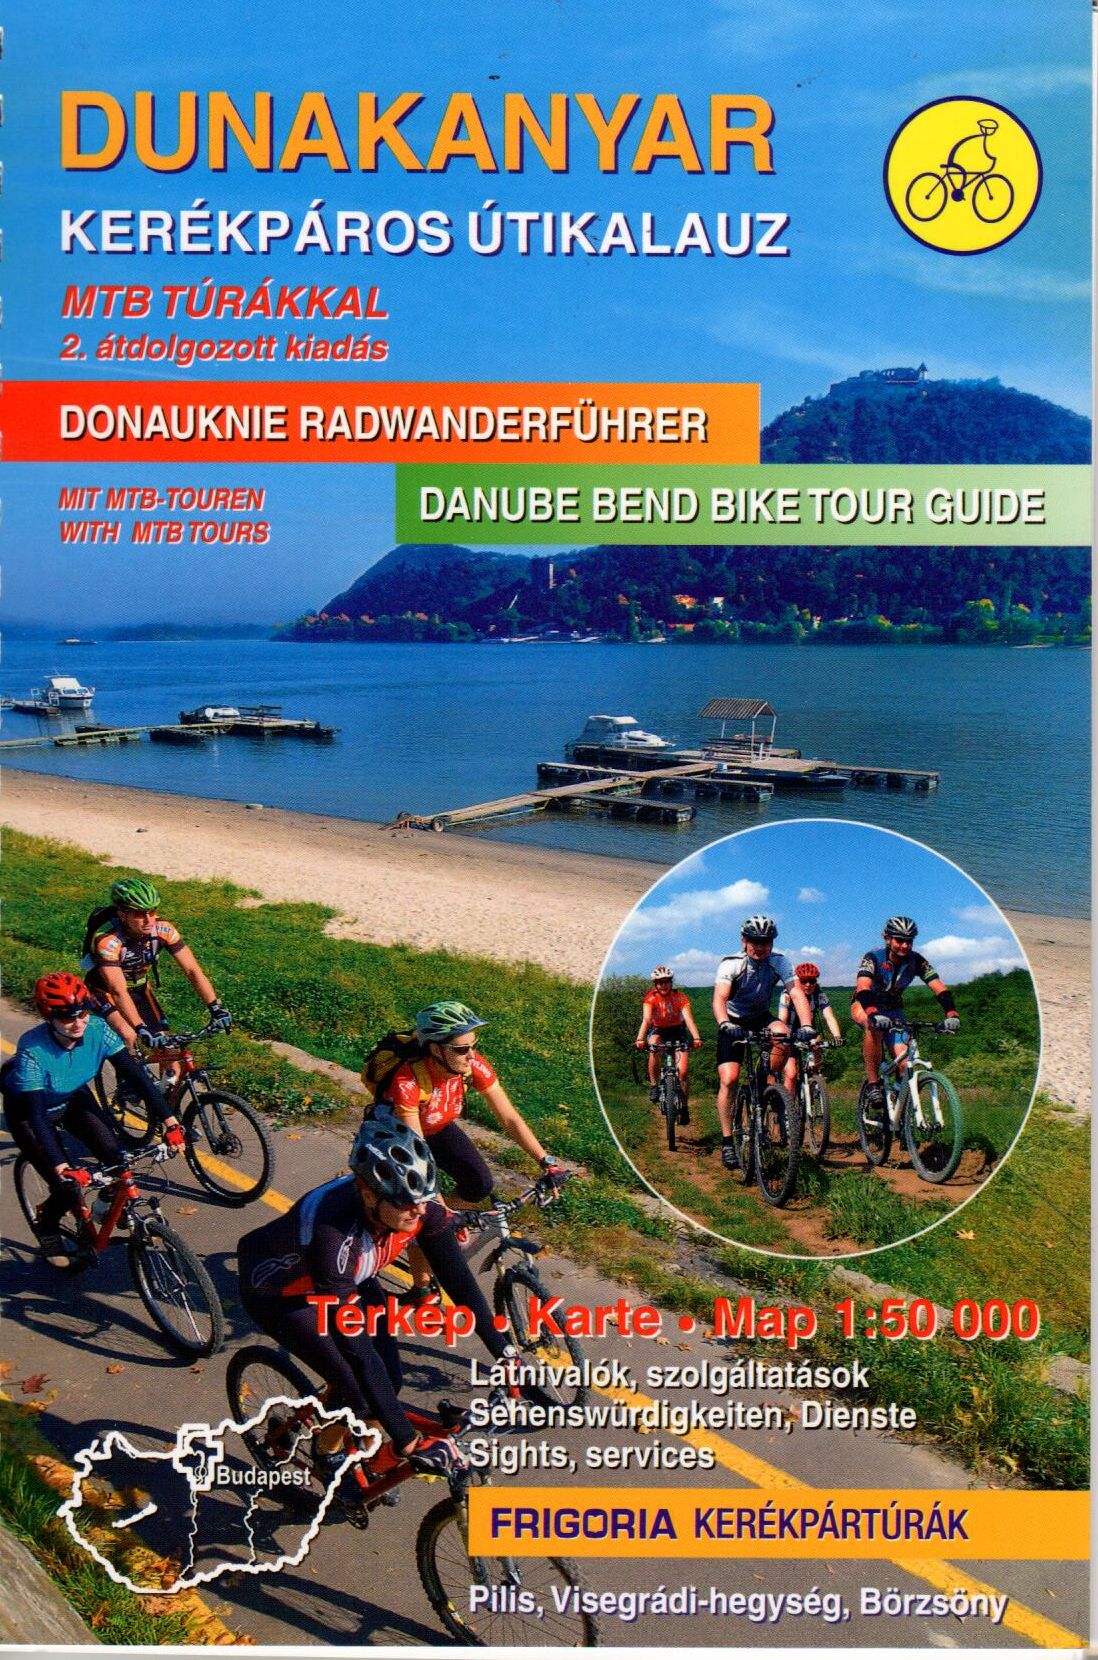 Danube bend (Pilis, Börzsöny, Naszály) biking atlas with spiral binding. Text in English and German, the legend includes alo Dutch explanations.